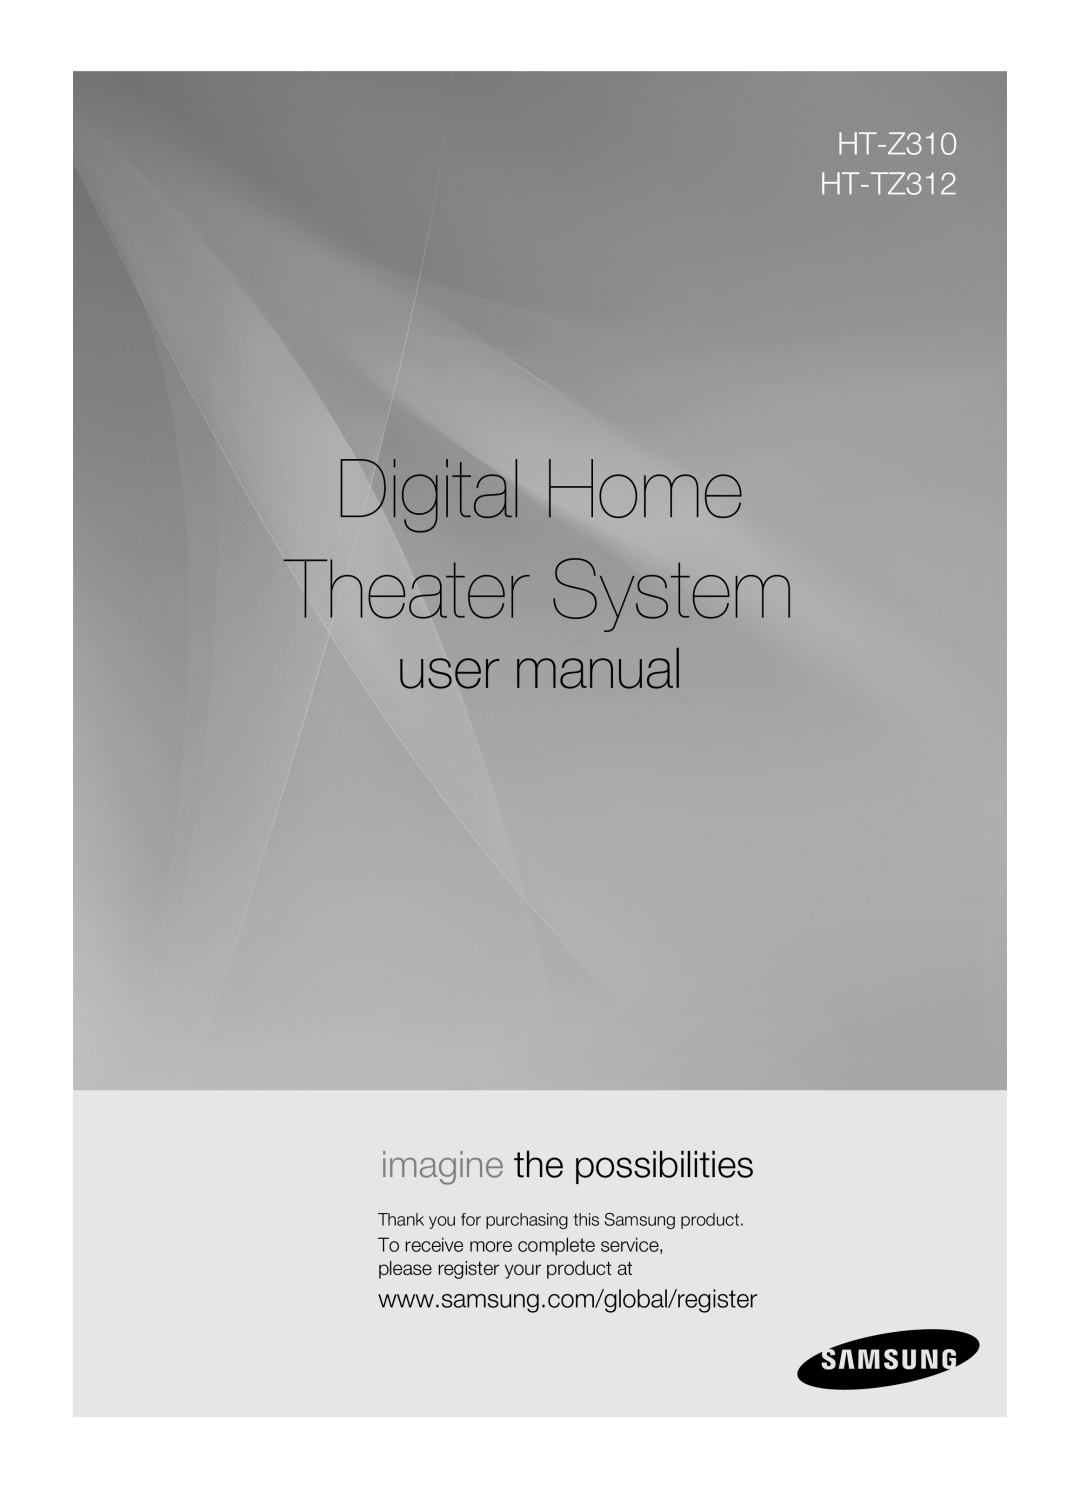 Samsung Digital Home Theater System, user manual, imagine the possibilities, HT-Z310 HT-TZ312 